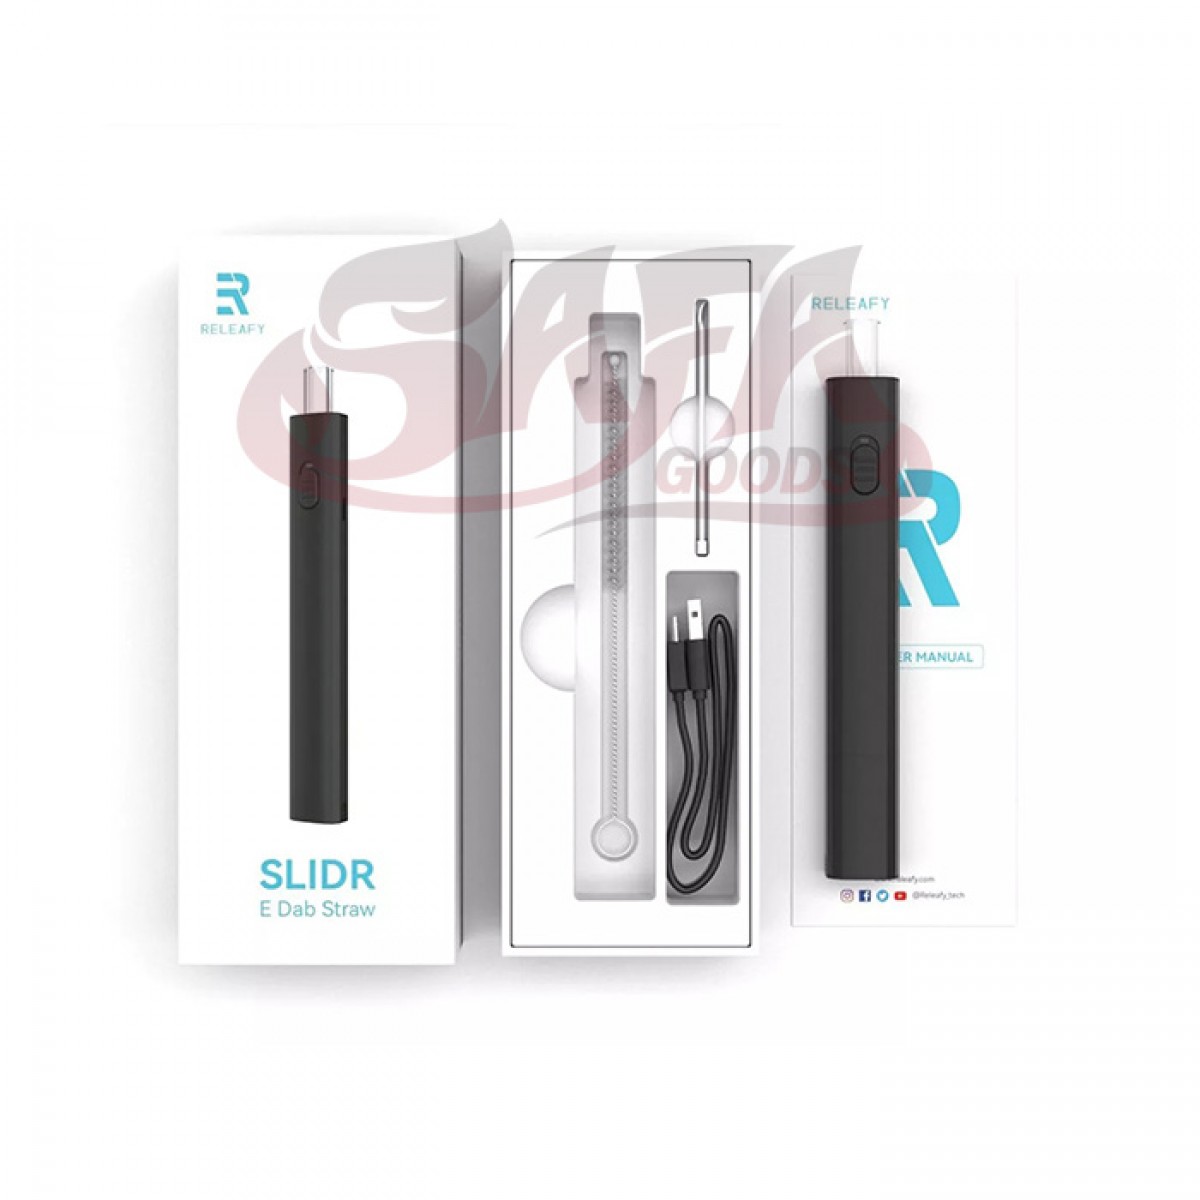 Releafy SLIDR Electronic Nectar Collector Kits